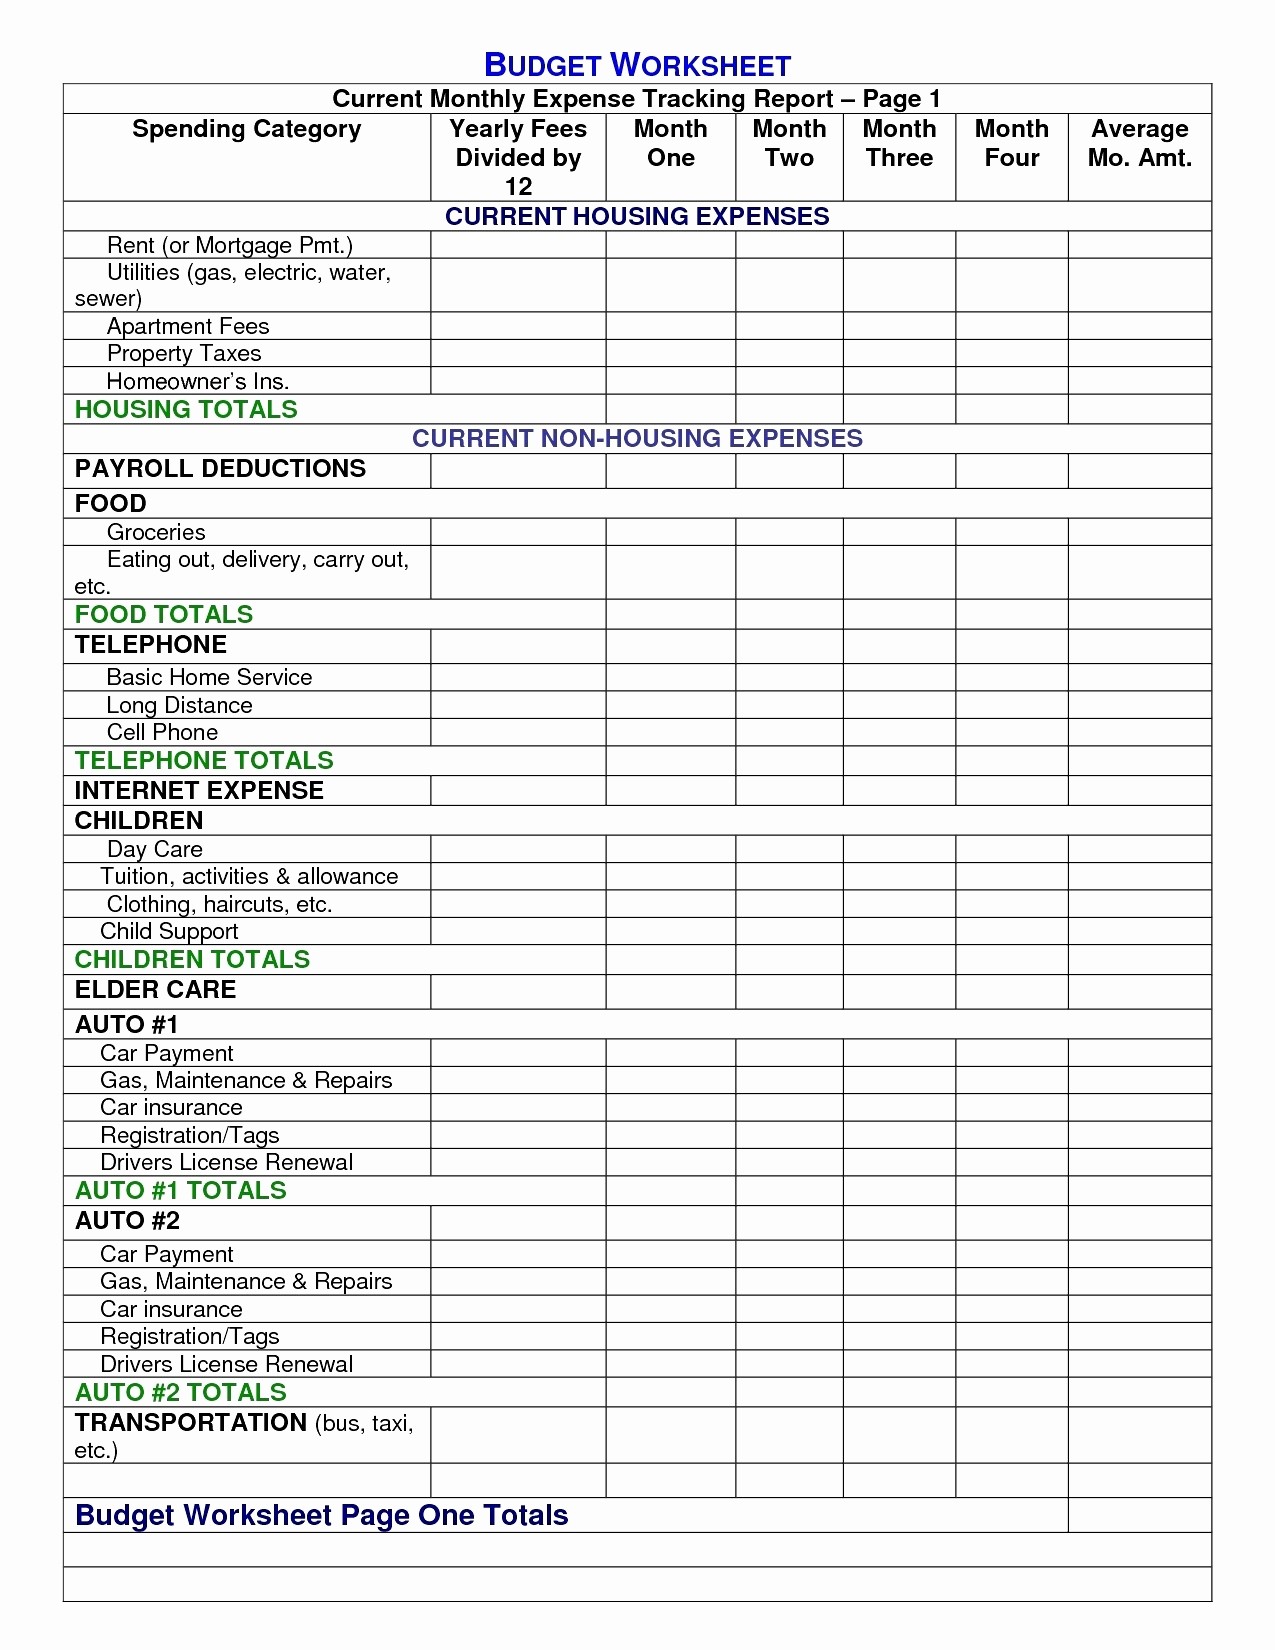 Real Estate Lead Tracking Sheet petermcfarland.us